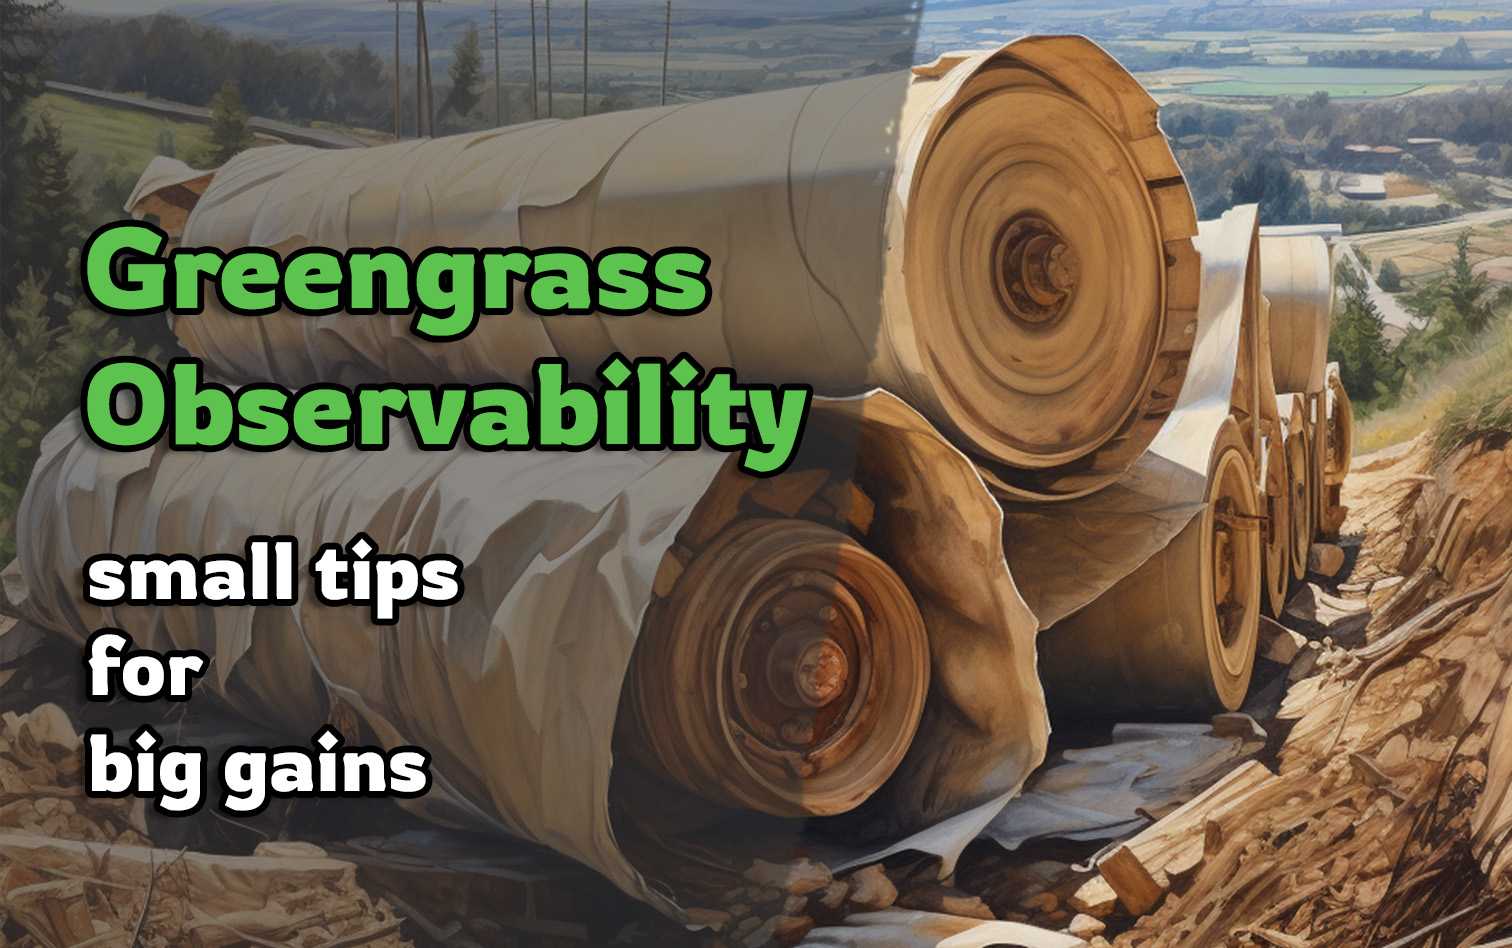 Small AWS Greengrass v2 tips for big observability gains